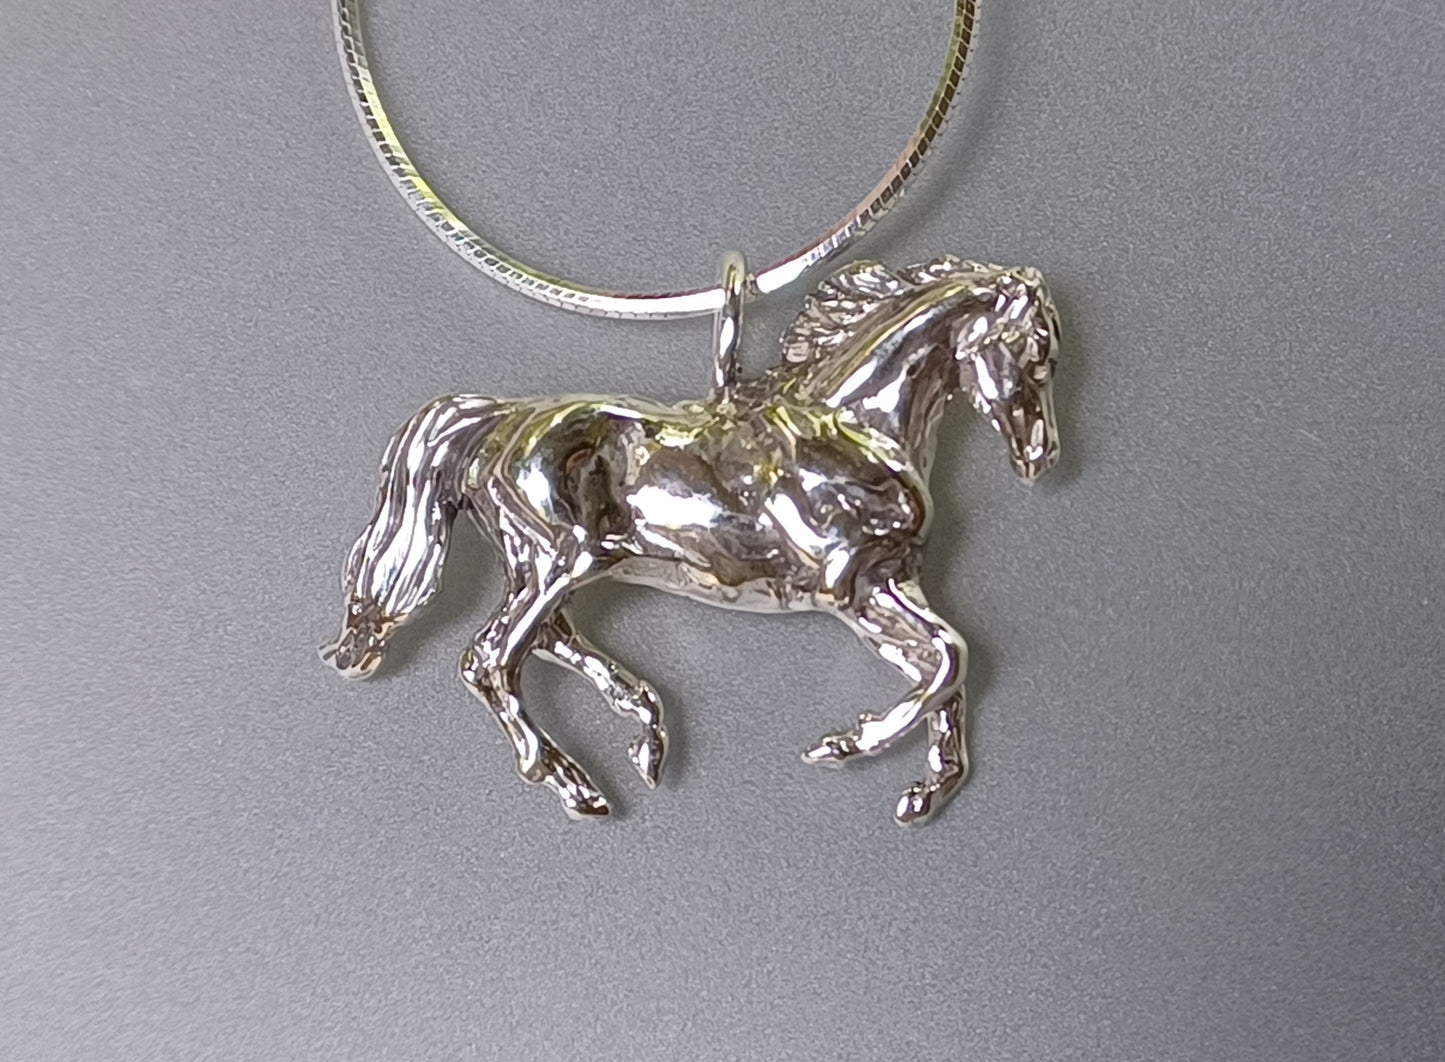 Galloping Horse Charm Pendant ONLY Made in USA Zimmer design